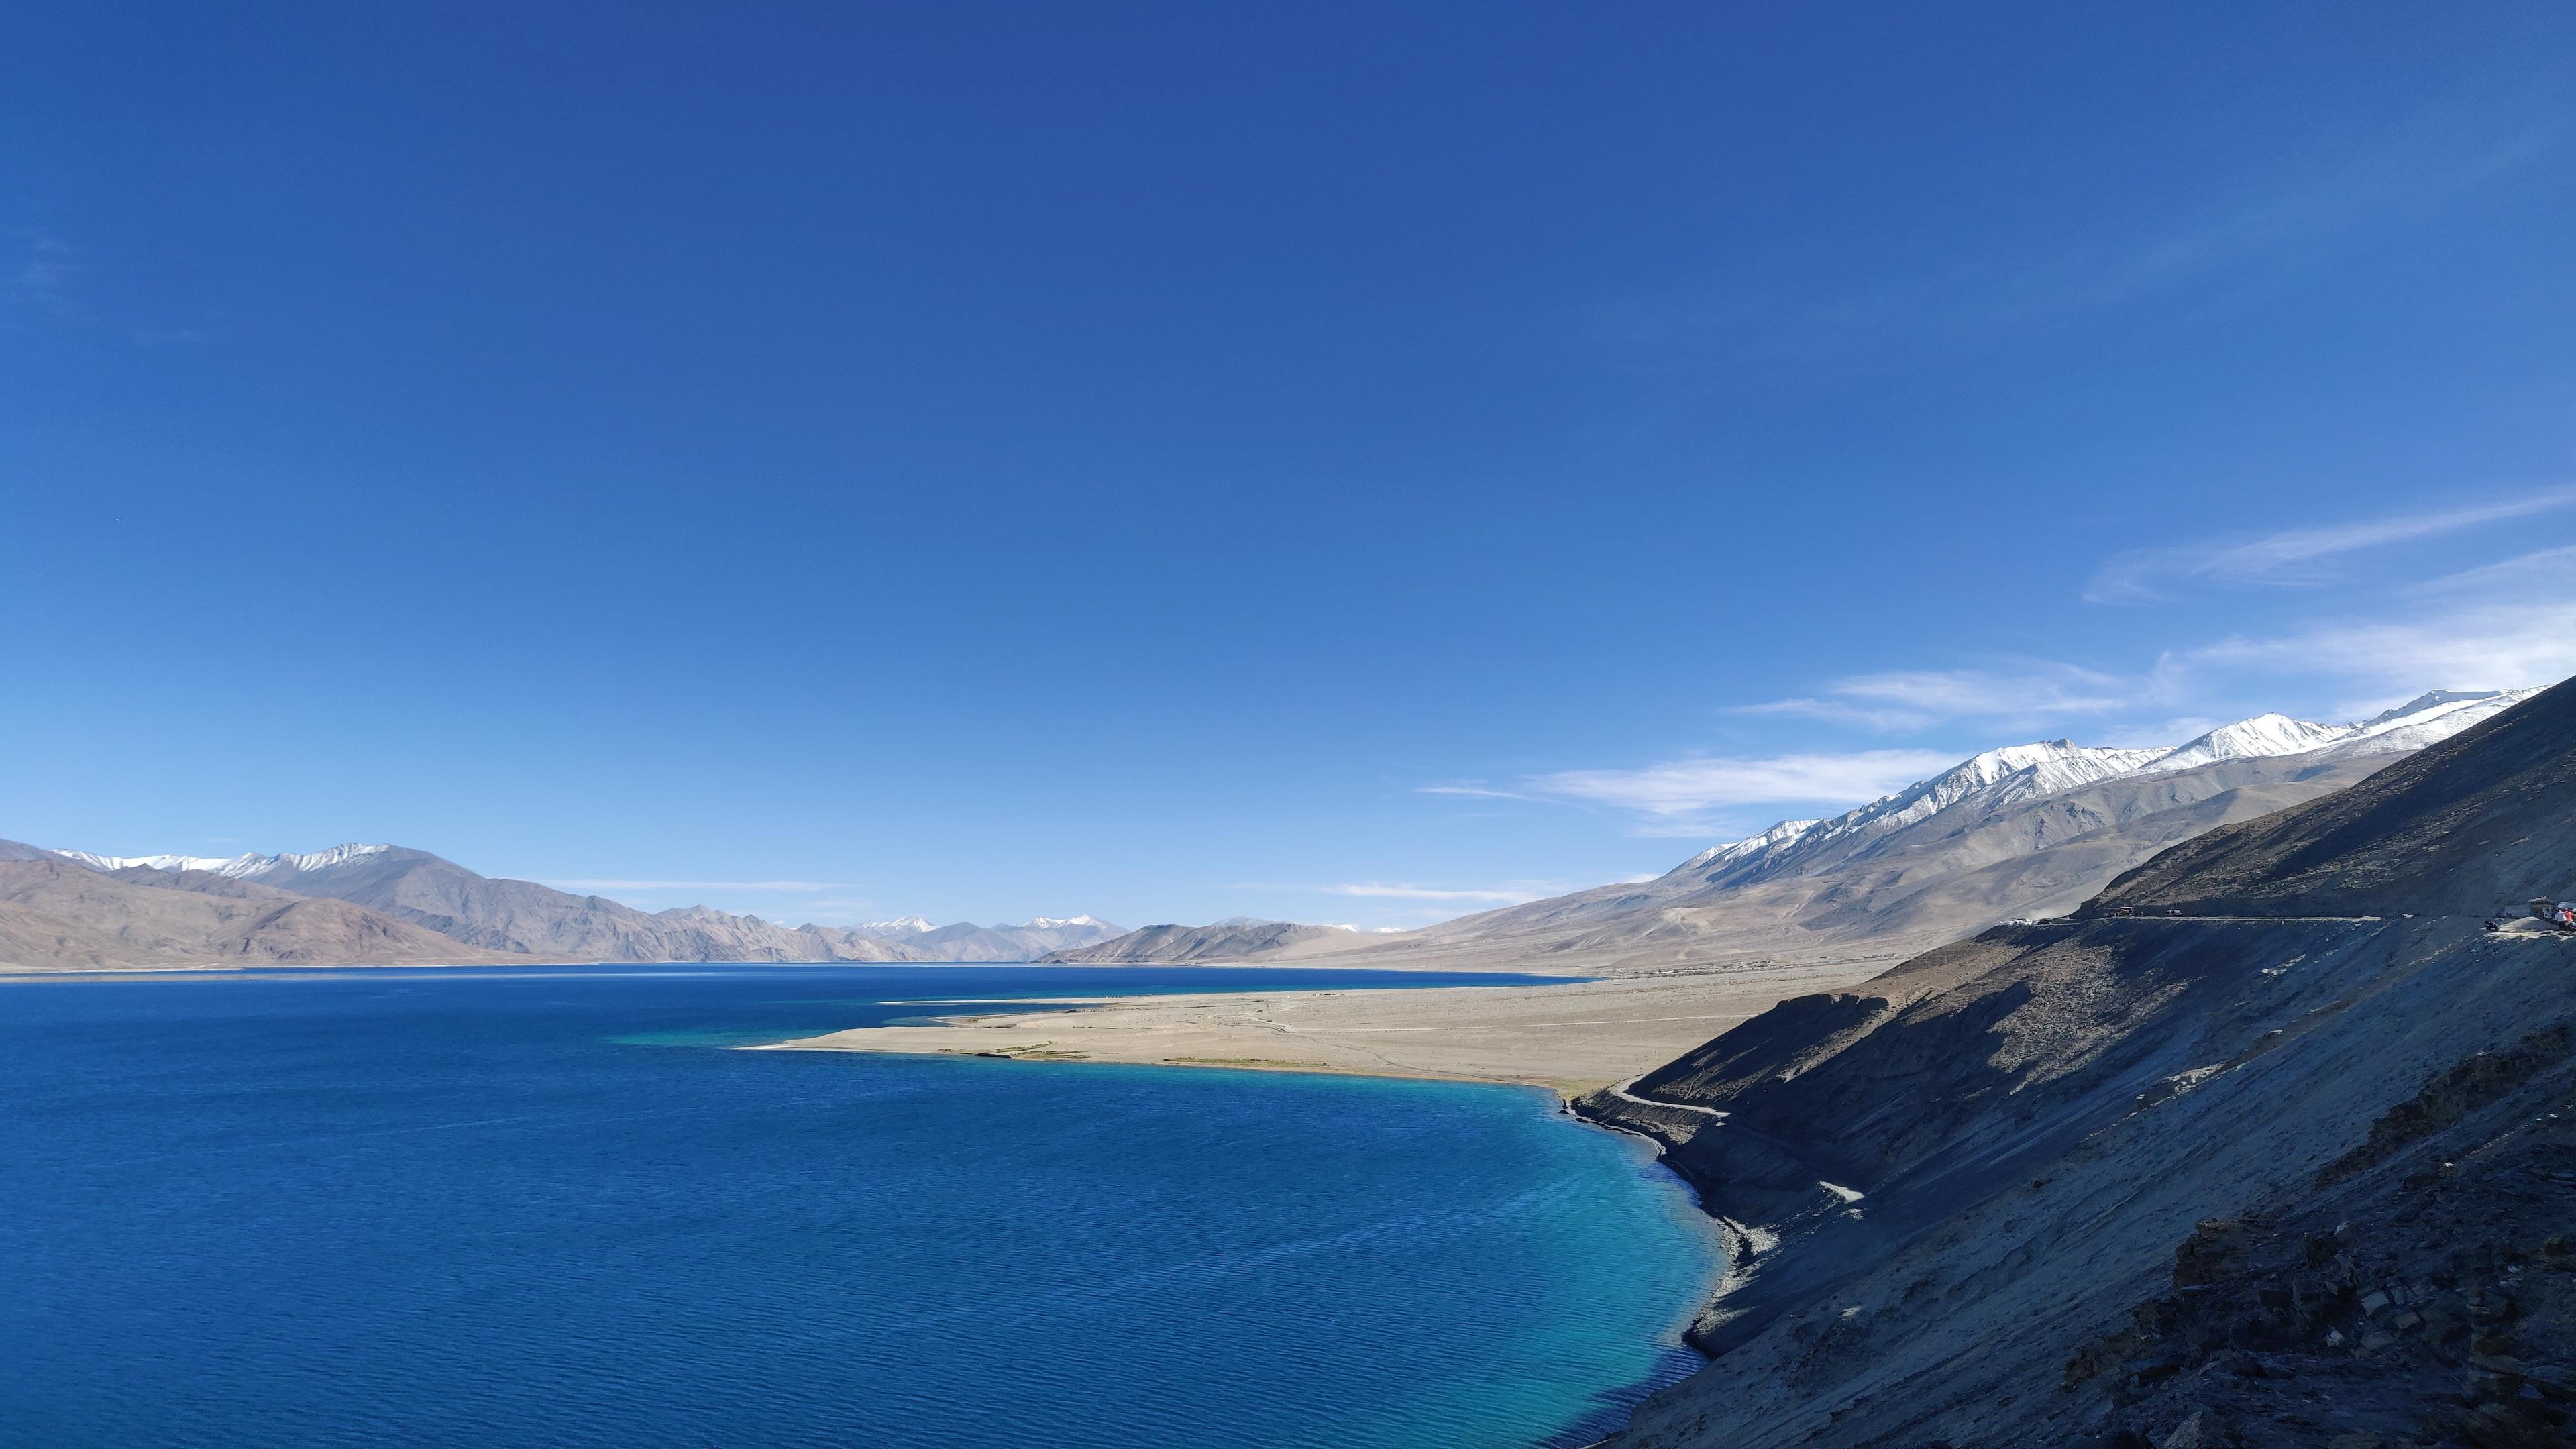 Ladakh 4K wallpapers for your desktop or mobile screen free and easy to  download